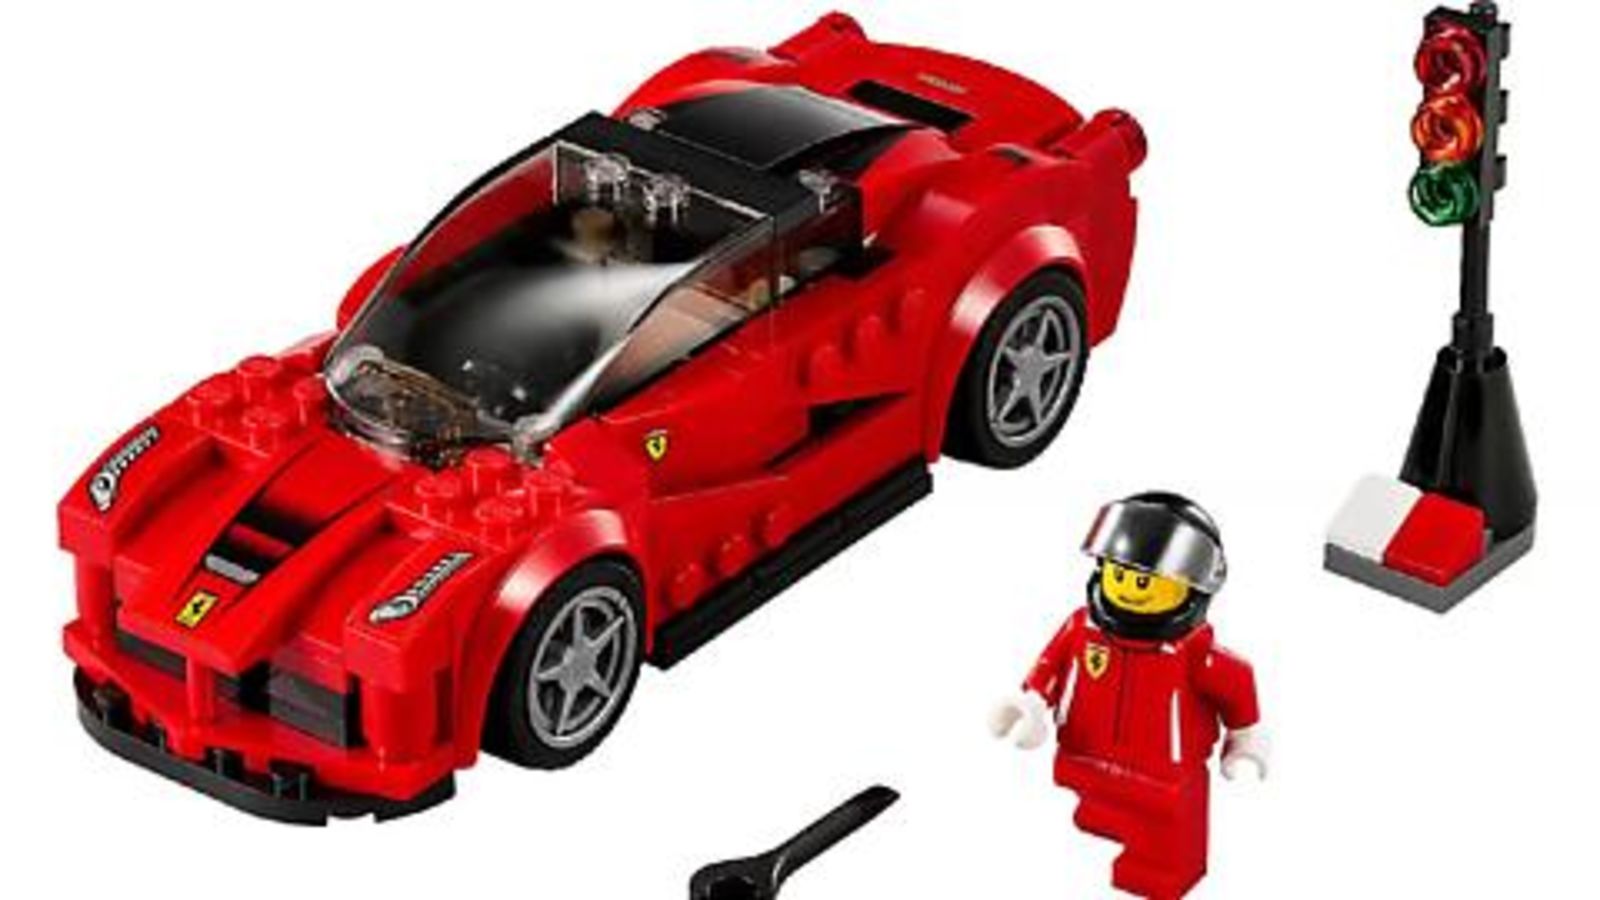 Illustration for article titled New Lego Cars